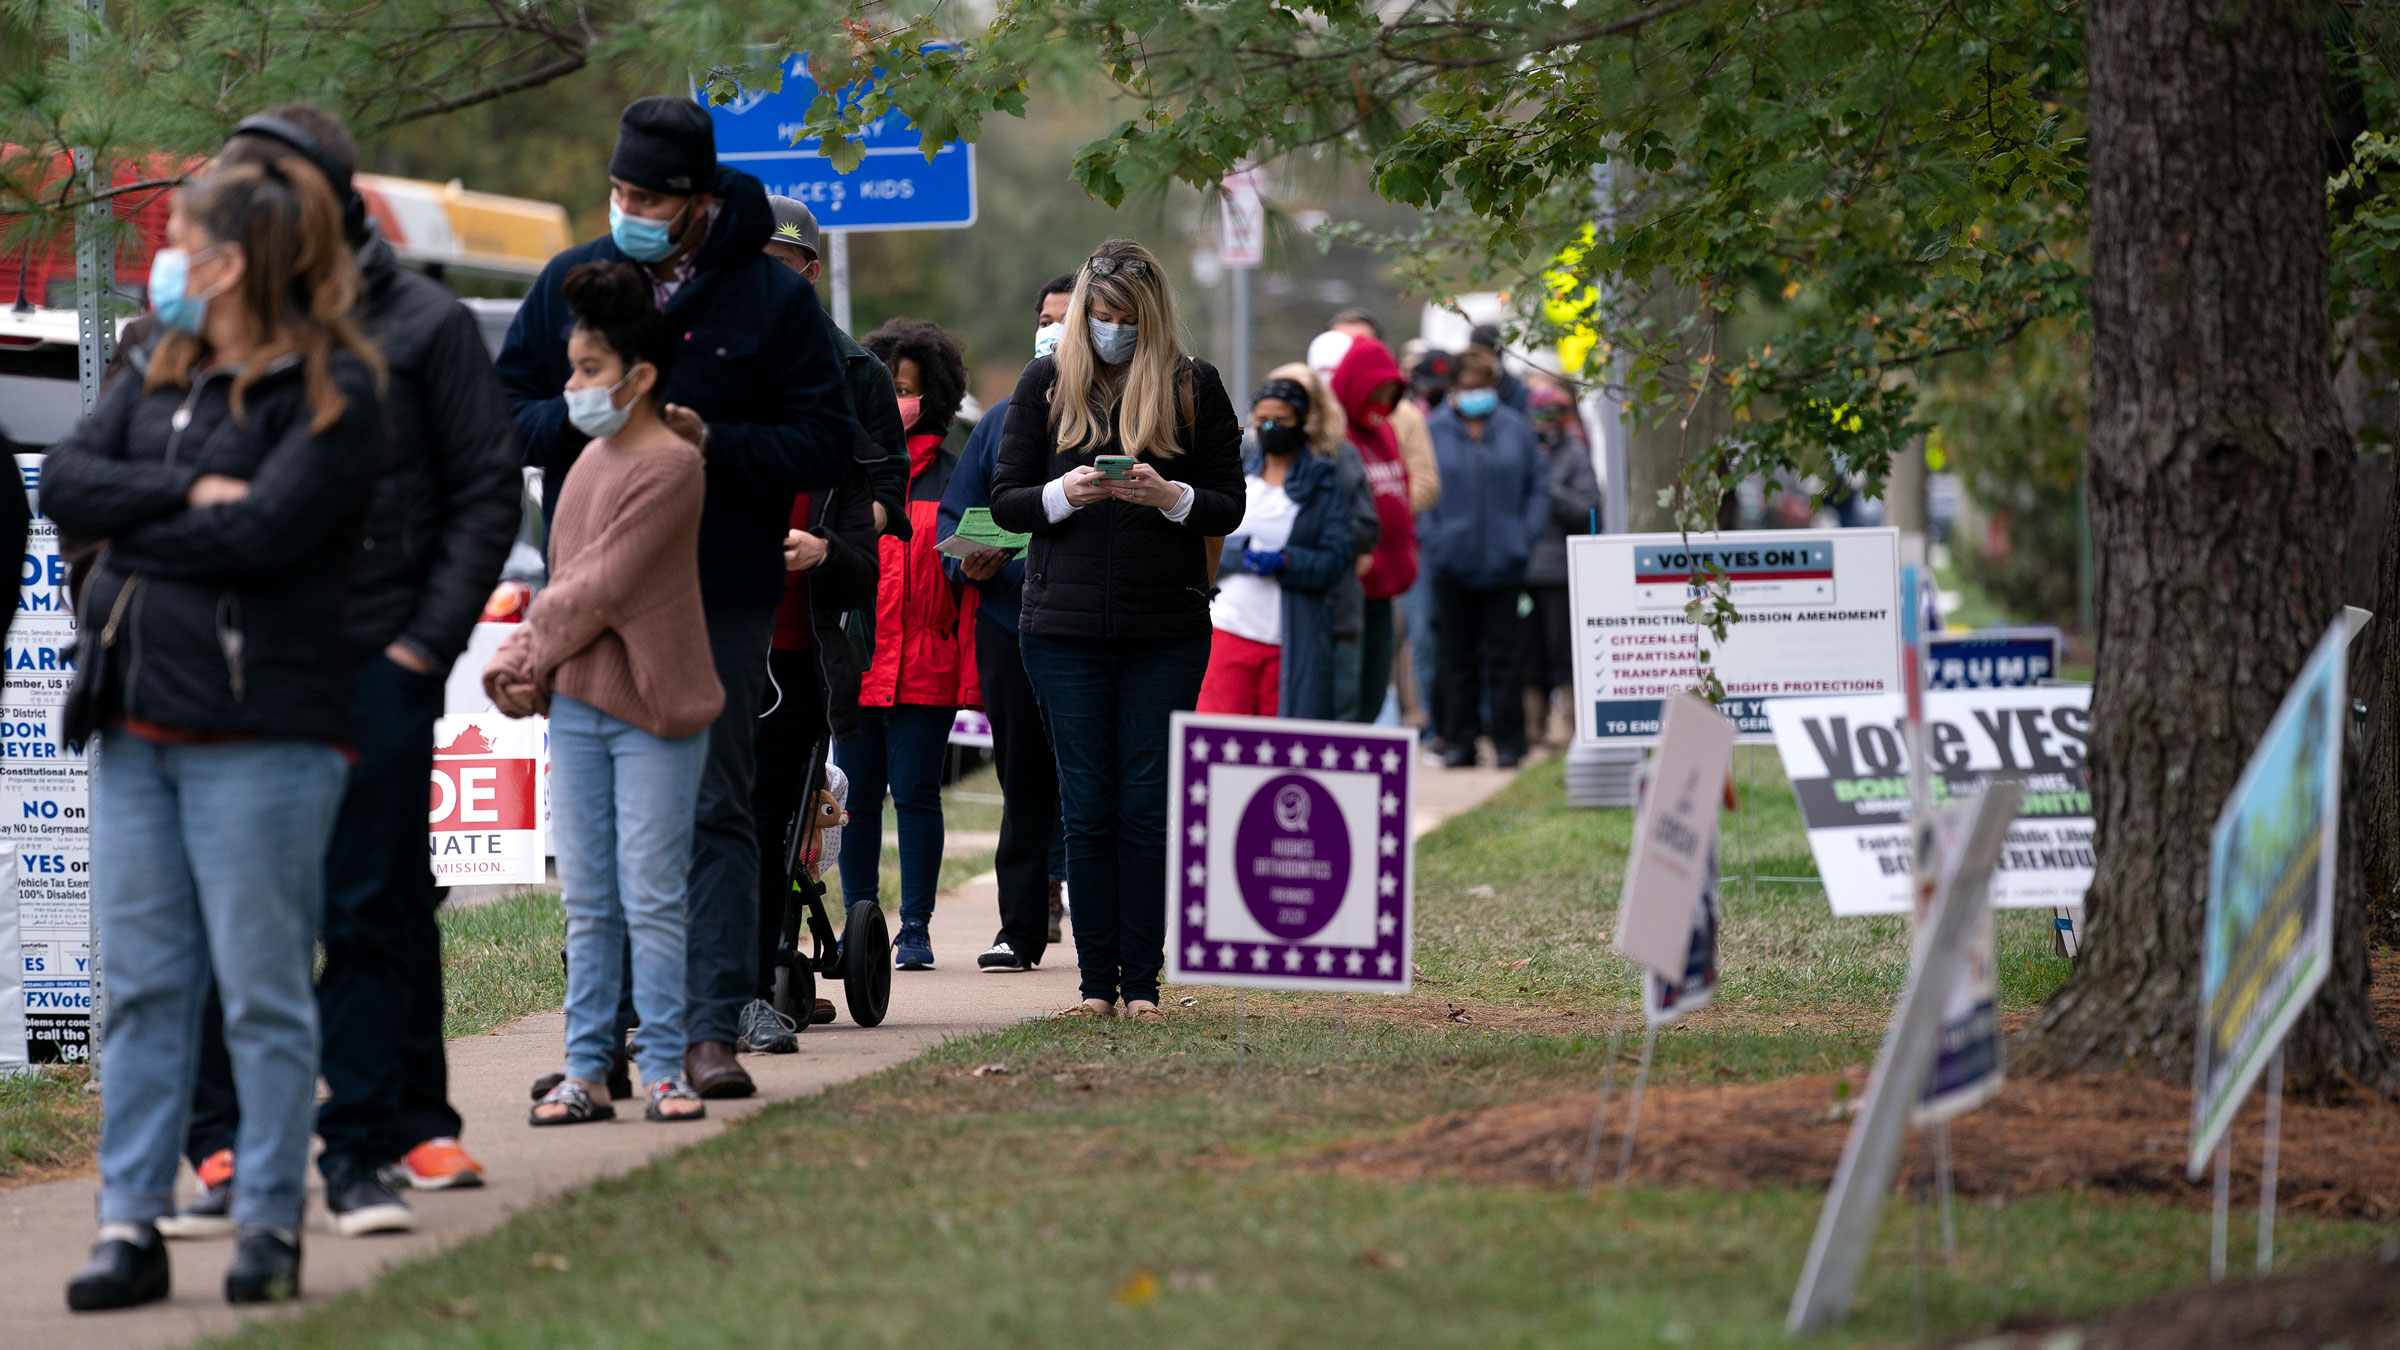 Voters wait in line to cast ballots at an early voting center in Alexandria, Virginia, on Sunday.